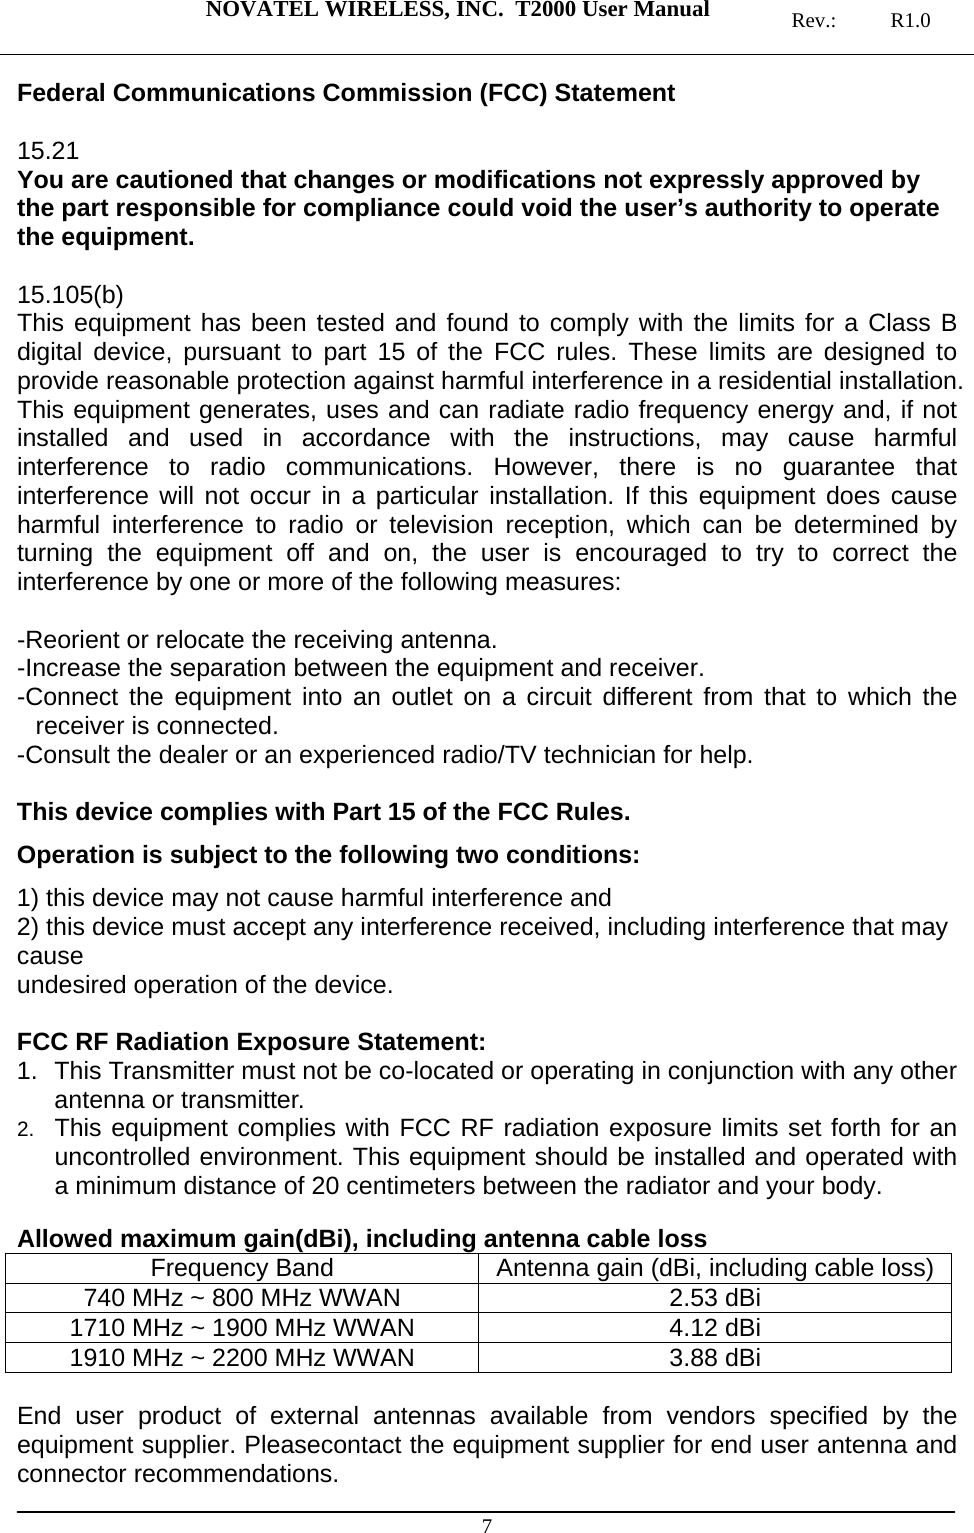  NOVATEL WIRELESS, INC.  T2000 User Manual   Rev.: R1.0  7 Federal Communications Commission (FCC) Statement  15.21 You are cautioned that changes or modifications not expressly approved by the part responsible for compliance could void the user’s authority to operate the equipment.  15.105(b) This equipment has been tested and found to comply with the limits for a Class B digital device, pursuant to part 15 of the FCC rules. These limits are designed to provide reasonable protection against harmful interference in a residential installation. This equipment generates, uses and can radiate radio frequency energy and, if not installed and used in accordance with the instructions, may cause harmful interference to radio communications. However, there is no guarantee that interference will not occur in a particular installation. If this equipment does cause harmful interference to radio or television reception, which can be determined by turning the equipment off and on, the user is encouraged to try to correct the interference by one or more of the following measures:  -Reorient or relocate the receiving antenna. -Increase the separation between the equipment and receiver. -Connect the equipment into an outlet on a circuit different from that to which the receiver is connected. -Consult the dealer or an experienced radio/TV technician for help.  This device complies with Part 15 of the FCC Rules.  Operation is subject to the following two conditions: 1) this device may not cause harmful interference and 2) this device must accept any interference received, including interference that may cause undesired operation of the device.  FCC RF Radiation Exposure Statement: 1.  This Transmitter must not be co-located or operating in conjunction with any other antenna or transmitter. 2.  This equipment complies with FCC RF radiation exposure limits set forth for an uncontrolled environment. This equipment should be installed and operated with a minimum distance of 20 centimeters between the radiator and your body.  Allowed maximum gain(dBi), including antenna cable loss Frequency Band  Antenna gain (dBi, including cable loss)740 MHz ~ 800 MHz WWAN  2.53 dBi 1710 MHz ~ 1900 MHz WWAN  4.12 dBi 1910 MHz ~ 2200 MHz WWAN  3.88 dBi  End user product of external antennas available from vendors specified by the equipment supplier. Pleasecontact the equipment supplier for end user antenna and connector recommendations. 